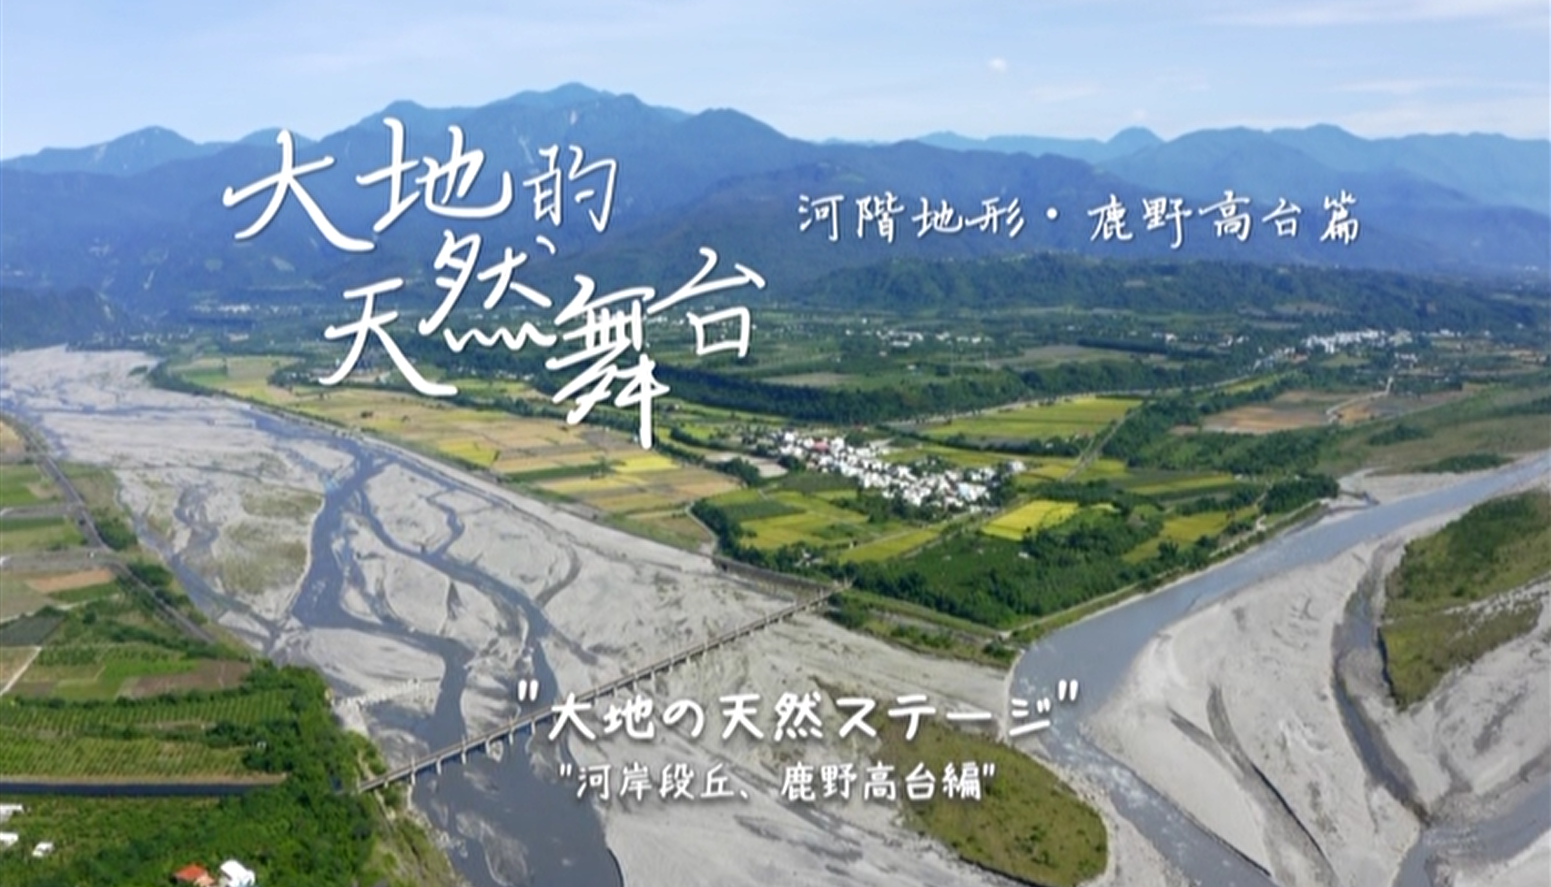 East Rift Valley Geological Landscape Tourism Promotional Video：Earth's Natural Stage: River Terraces at Luye Highland Japanese